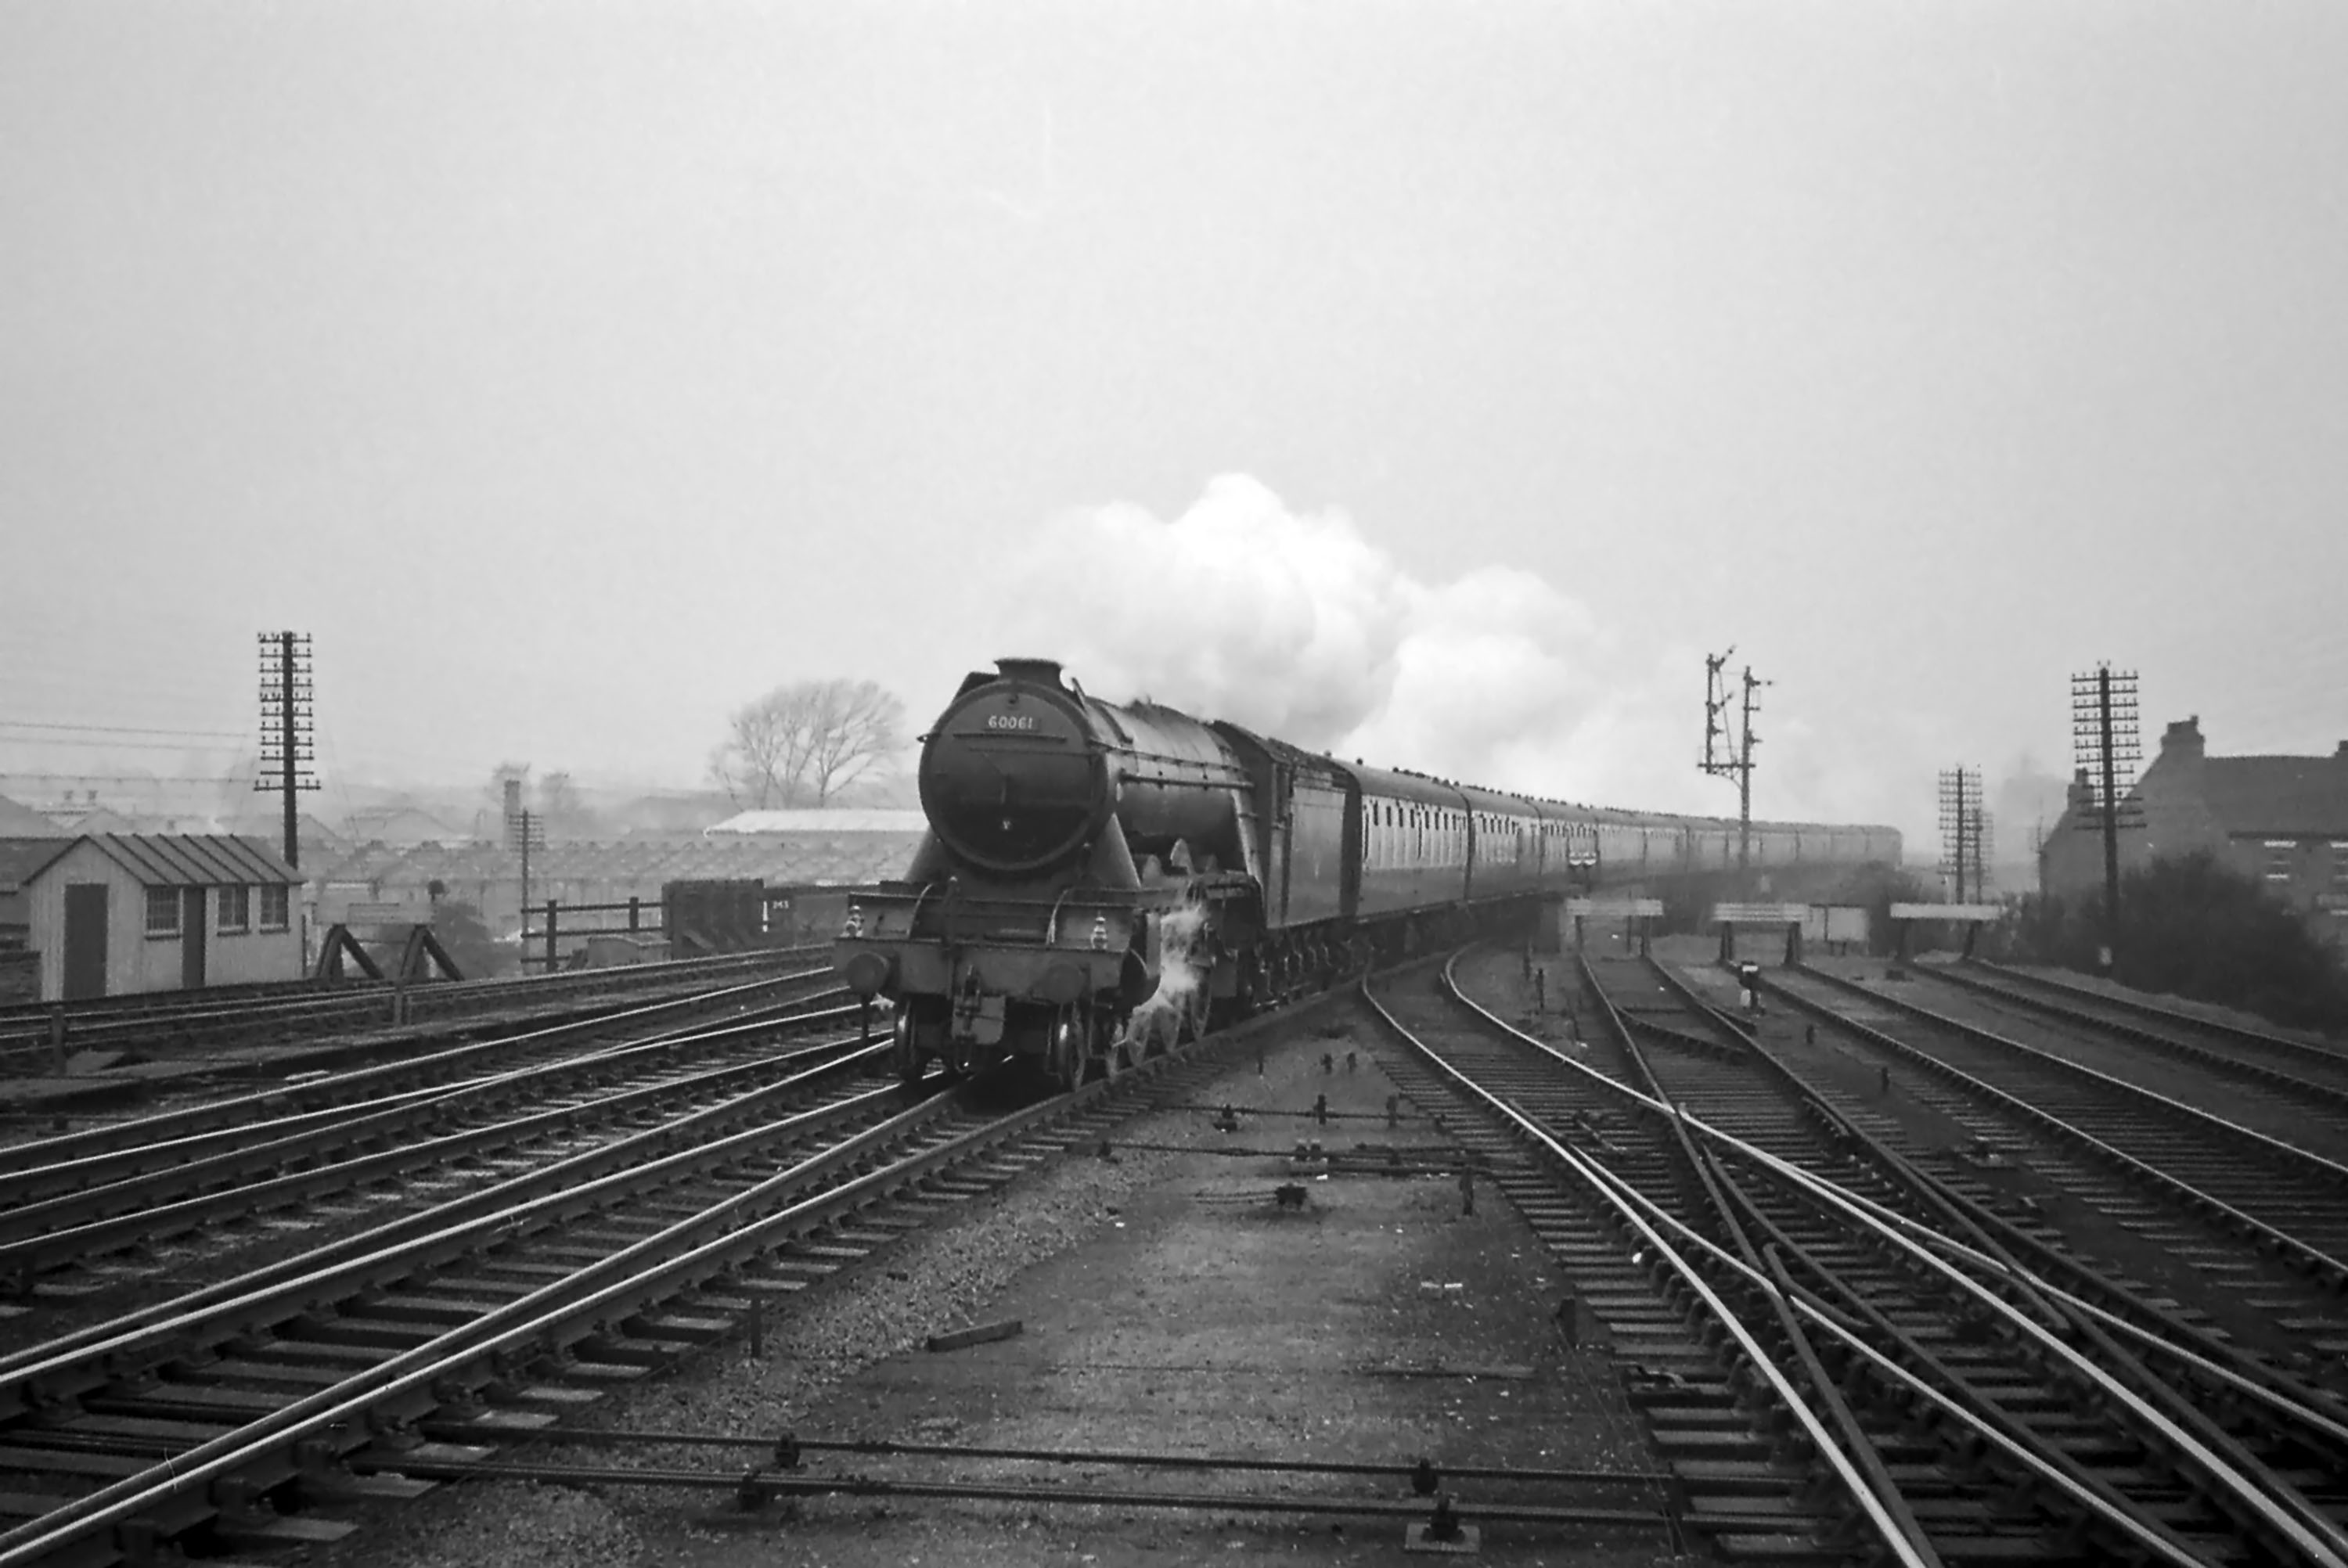 This photograph was taken from the north end of the Up (southbound) platform, opposite Grantham North box (which was just off shot to the left). It’s not possible to reach this spot today because the Up platform was cut short in the late 1960s. The first coach of this southbound train on the Up Main line, hauled by No.60061 Pretty Polly, is passing over the connection to the Up Bay platform. The Nottingham lines are converging into the Main lines from the left. We can see that the train is not stopping at the station because both the Grantham North box Up Main home signal and, beneath it, the Grantham Yard box Up Main distant signal are showing ‘clear’. To the right of the Main Line signals is the signal for the Up Bay platform. It’s worth pointing out here the two lines of telegraph poles, one on each side of the railway, which used to be so much part of the everyday railway scene. These pole routes carried the block telegraph, the ‘speaking' (single needle) telegraph, telephone and other circuits on which the railway depended for the communication vital to effective operation. It was the responsibility of the Signal and Telegraph (S&T) Engineers and Technicians to maintain this widespread network and also to keep the signals maintained and in working order. It was a job that often involved working at height exposed to the worst of the weather. Photograph by Noel Ingram, used with permission from Steam World.